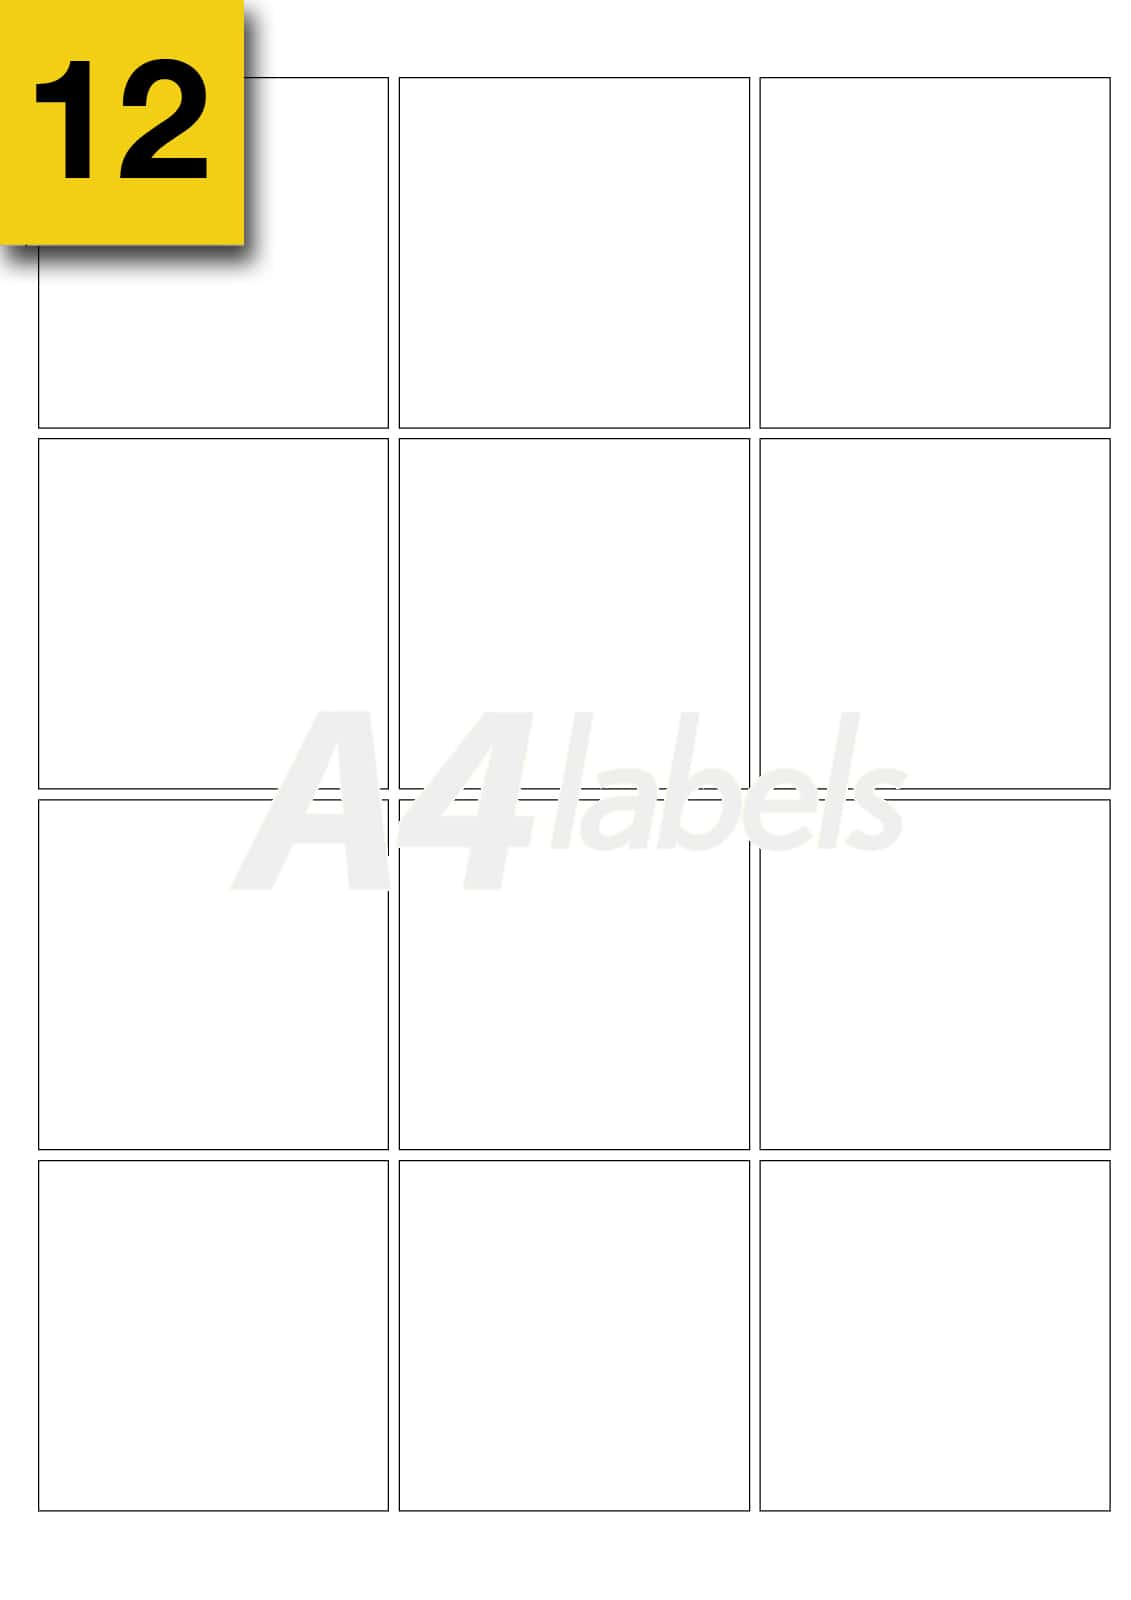 2 X 4 Label Template 10 Per Sheet And Round Label Template 4 Per Sheet